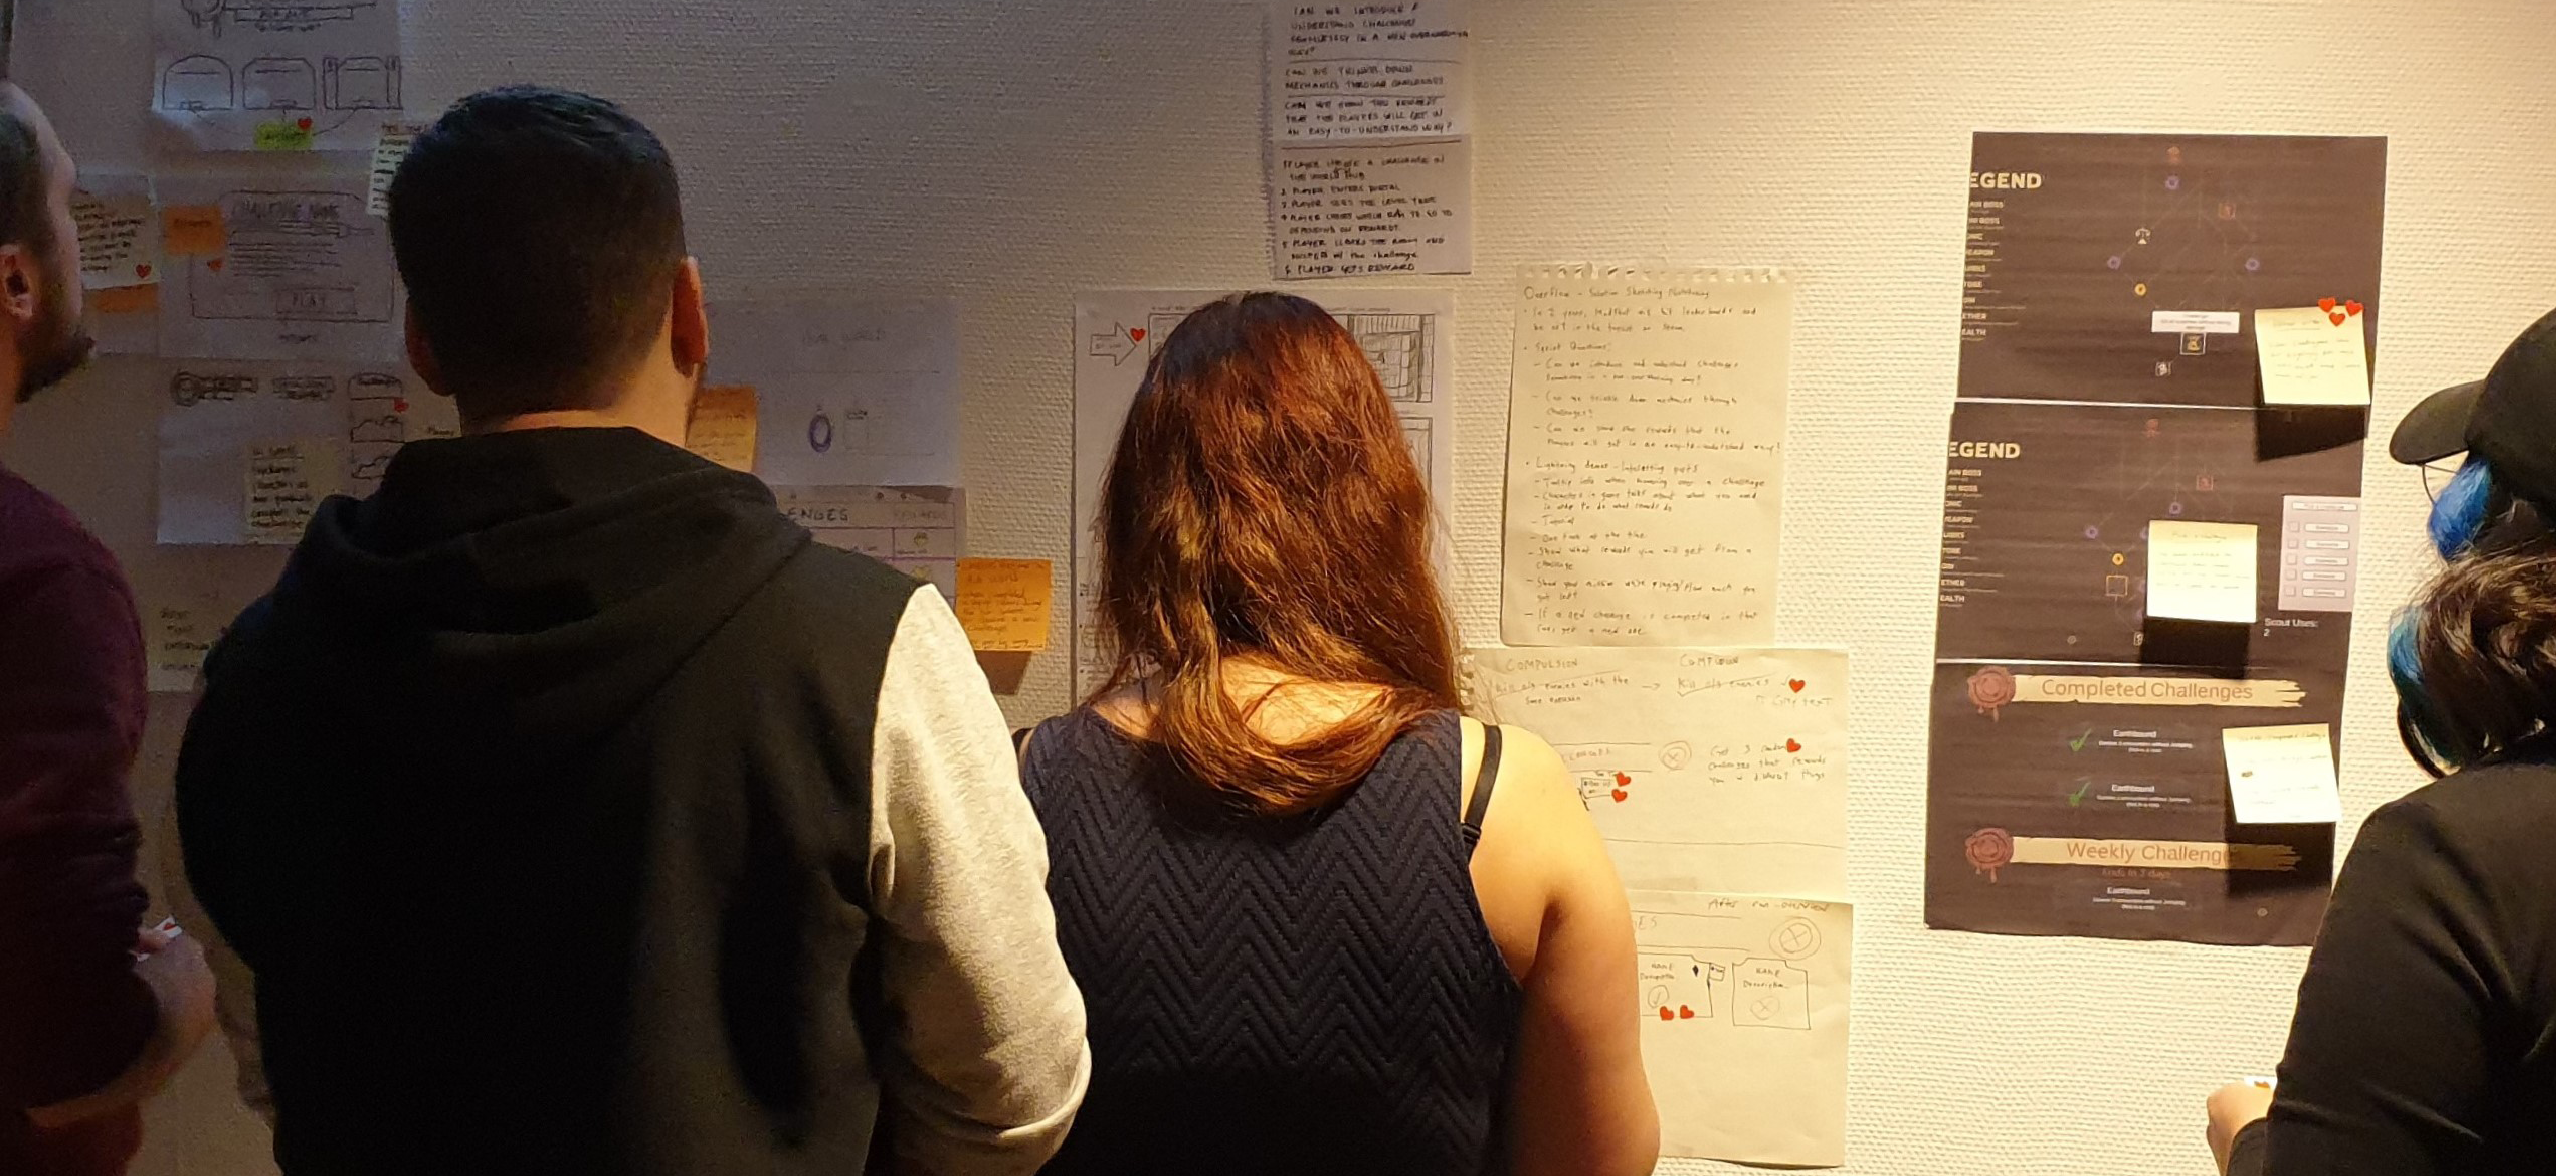 Picture of our team during the workshop, looking at sketches on the wall